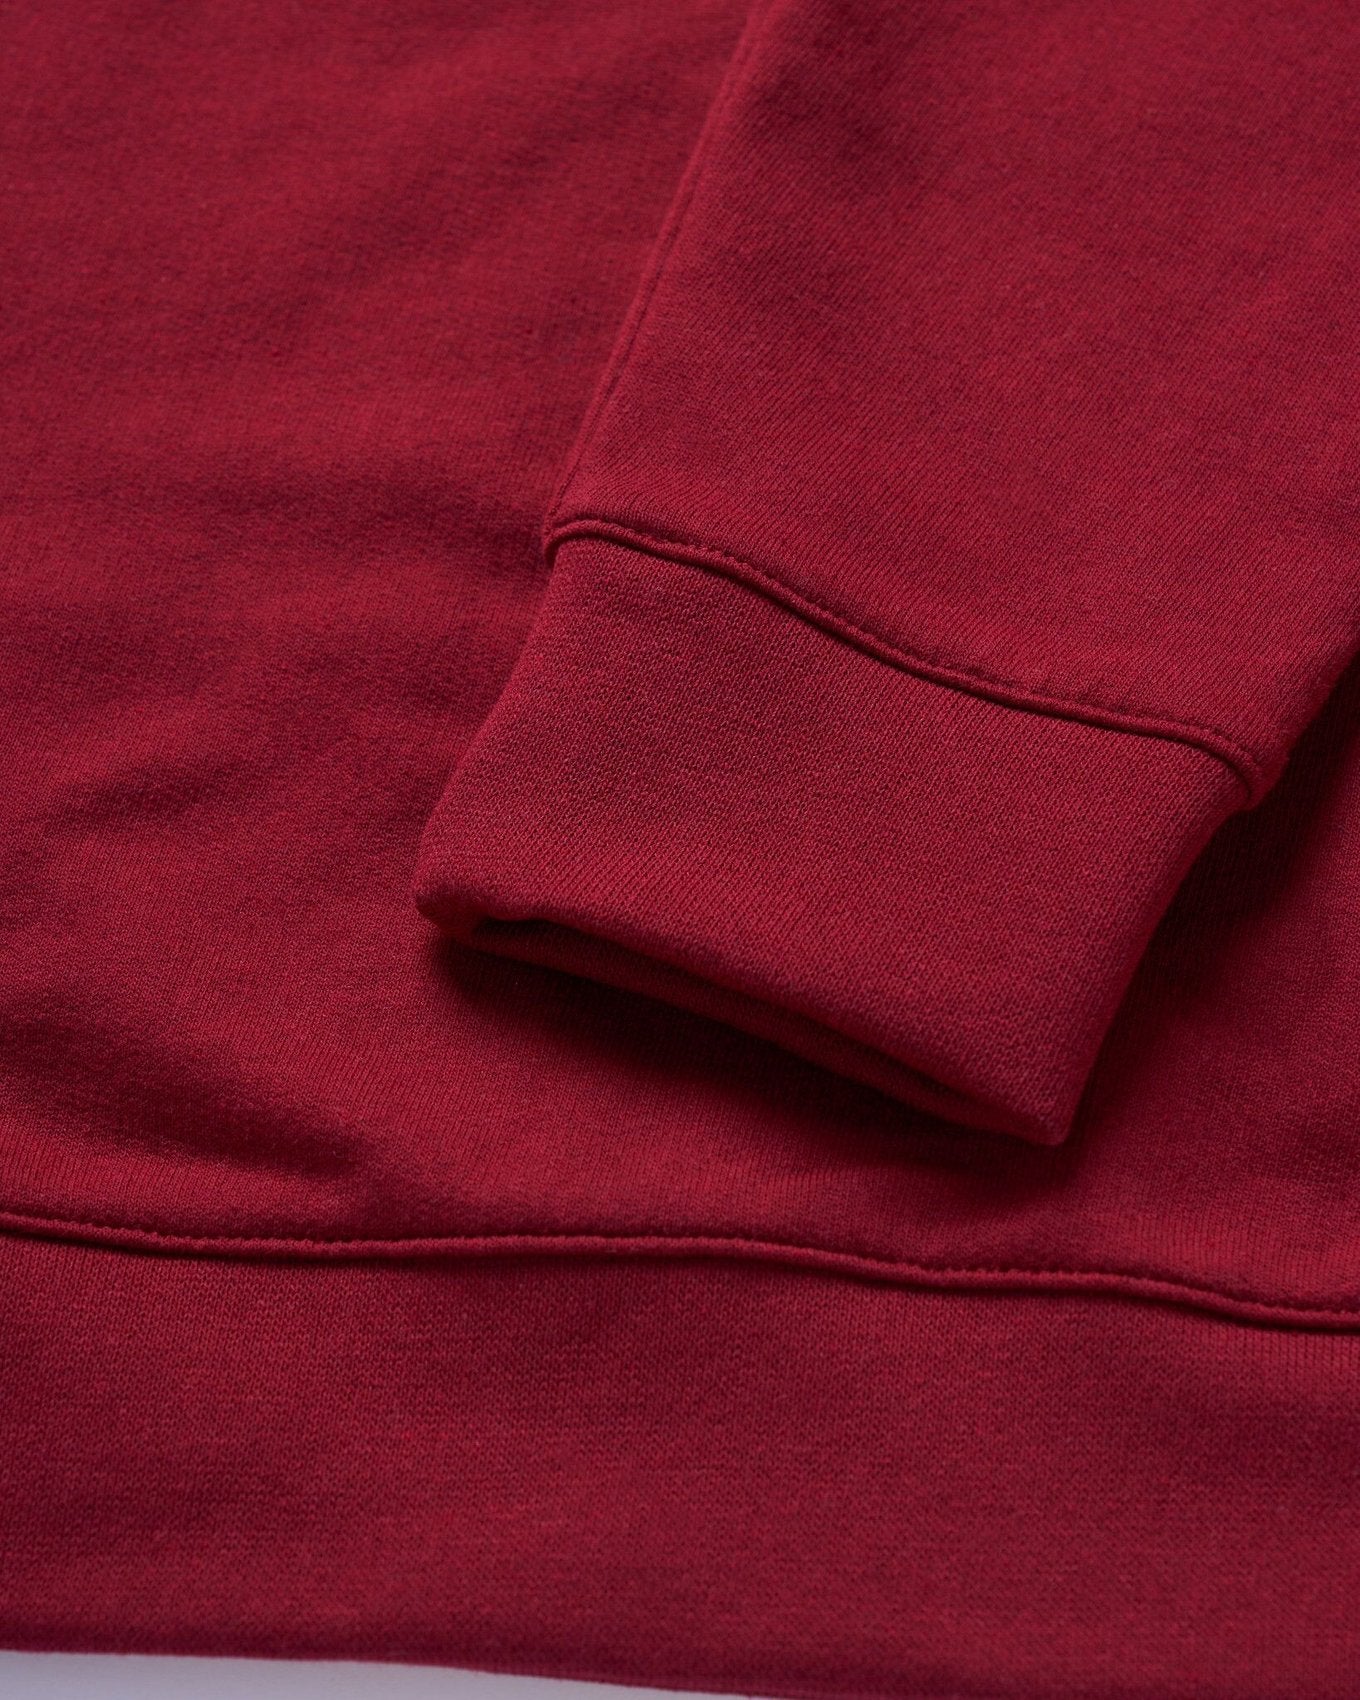 ReApparel Baby Crew Neck . in color Garnet and shape long sleeve